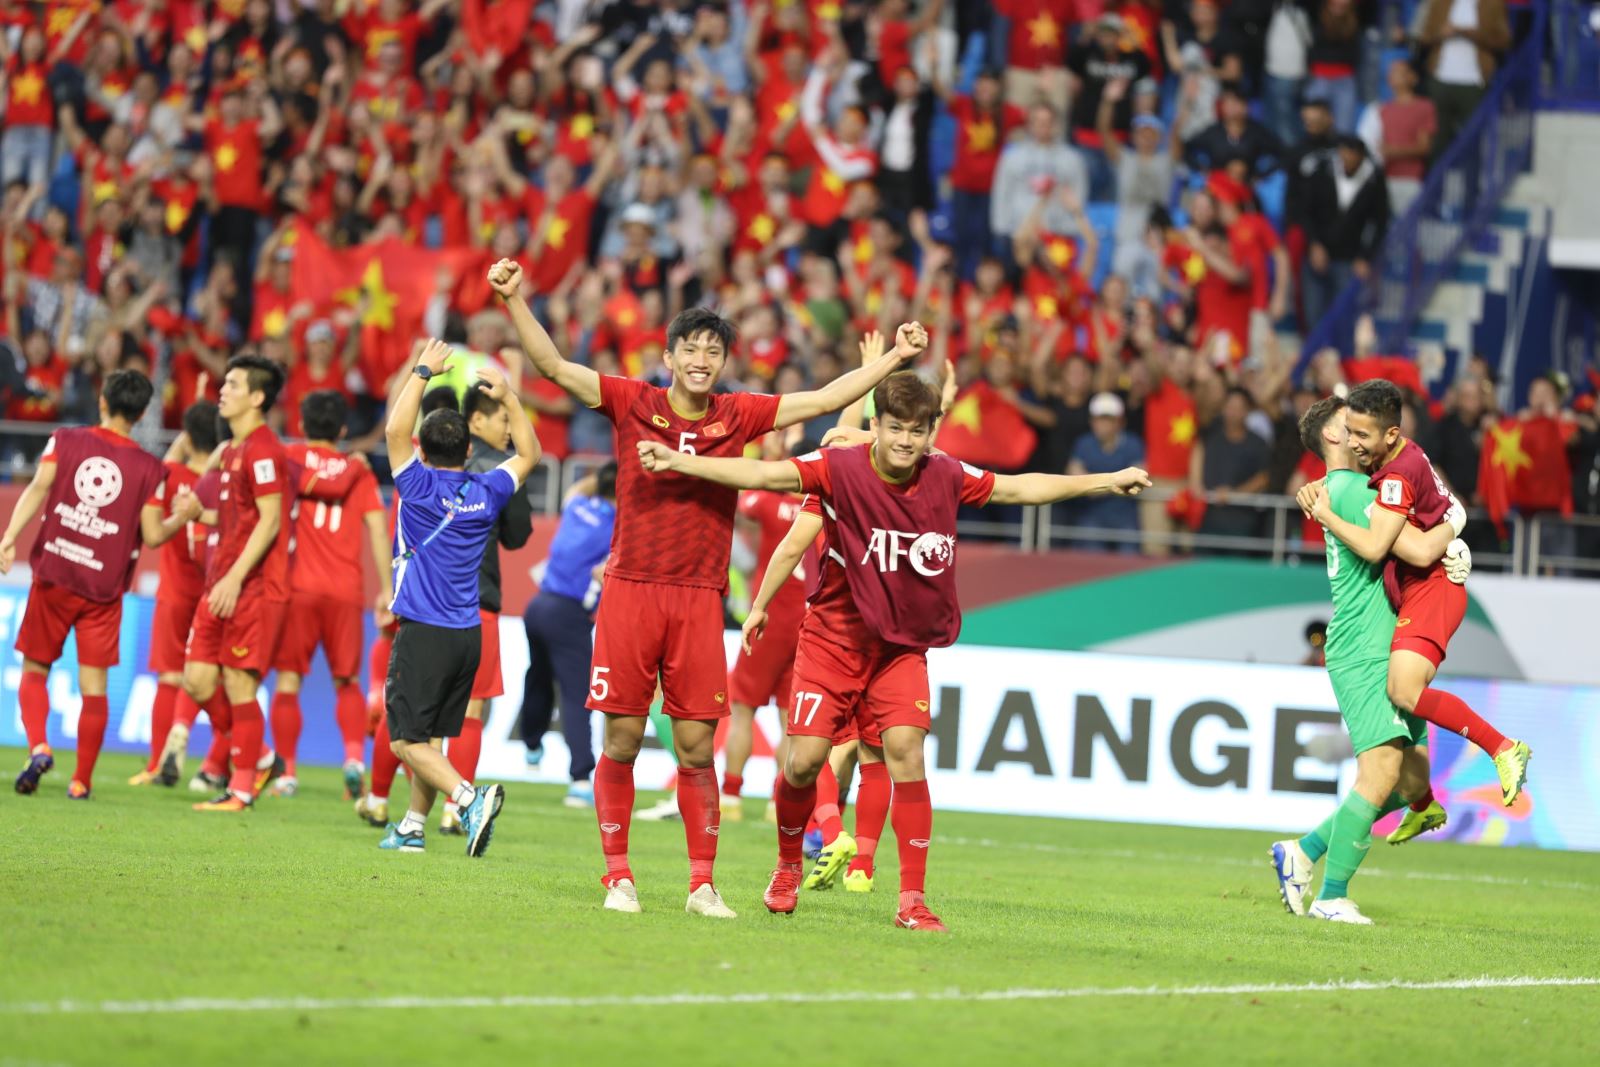 Vietnam is the defending champion of men's football at the SEA Games